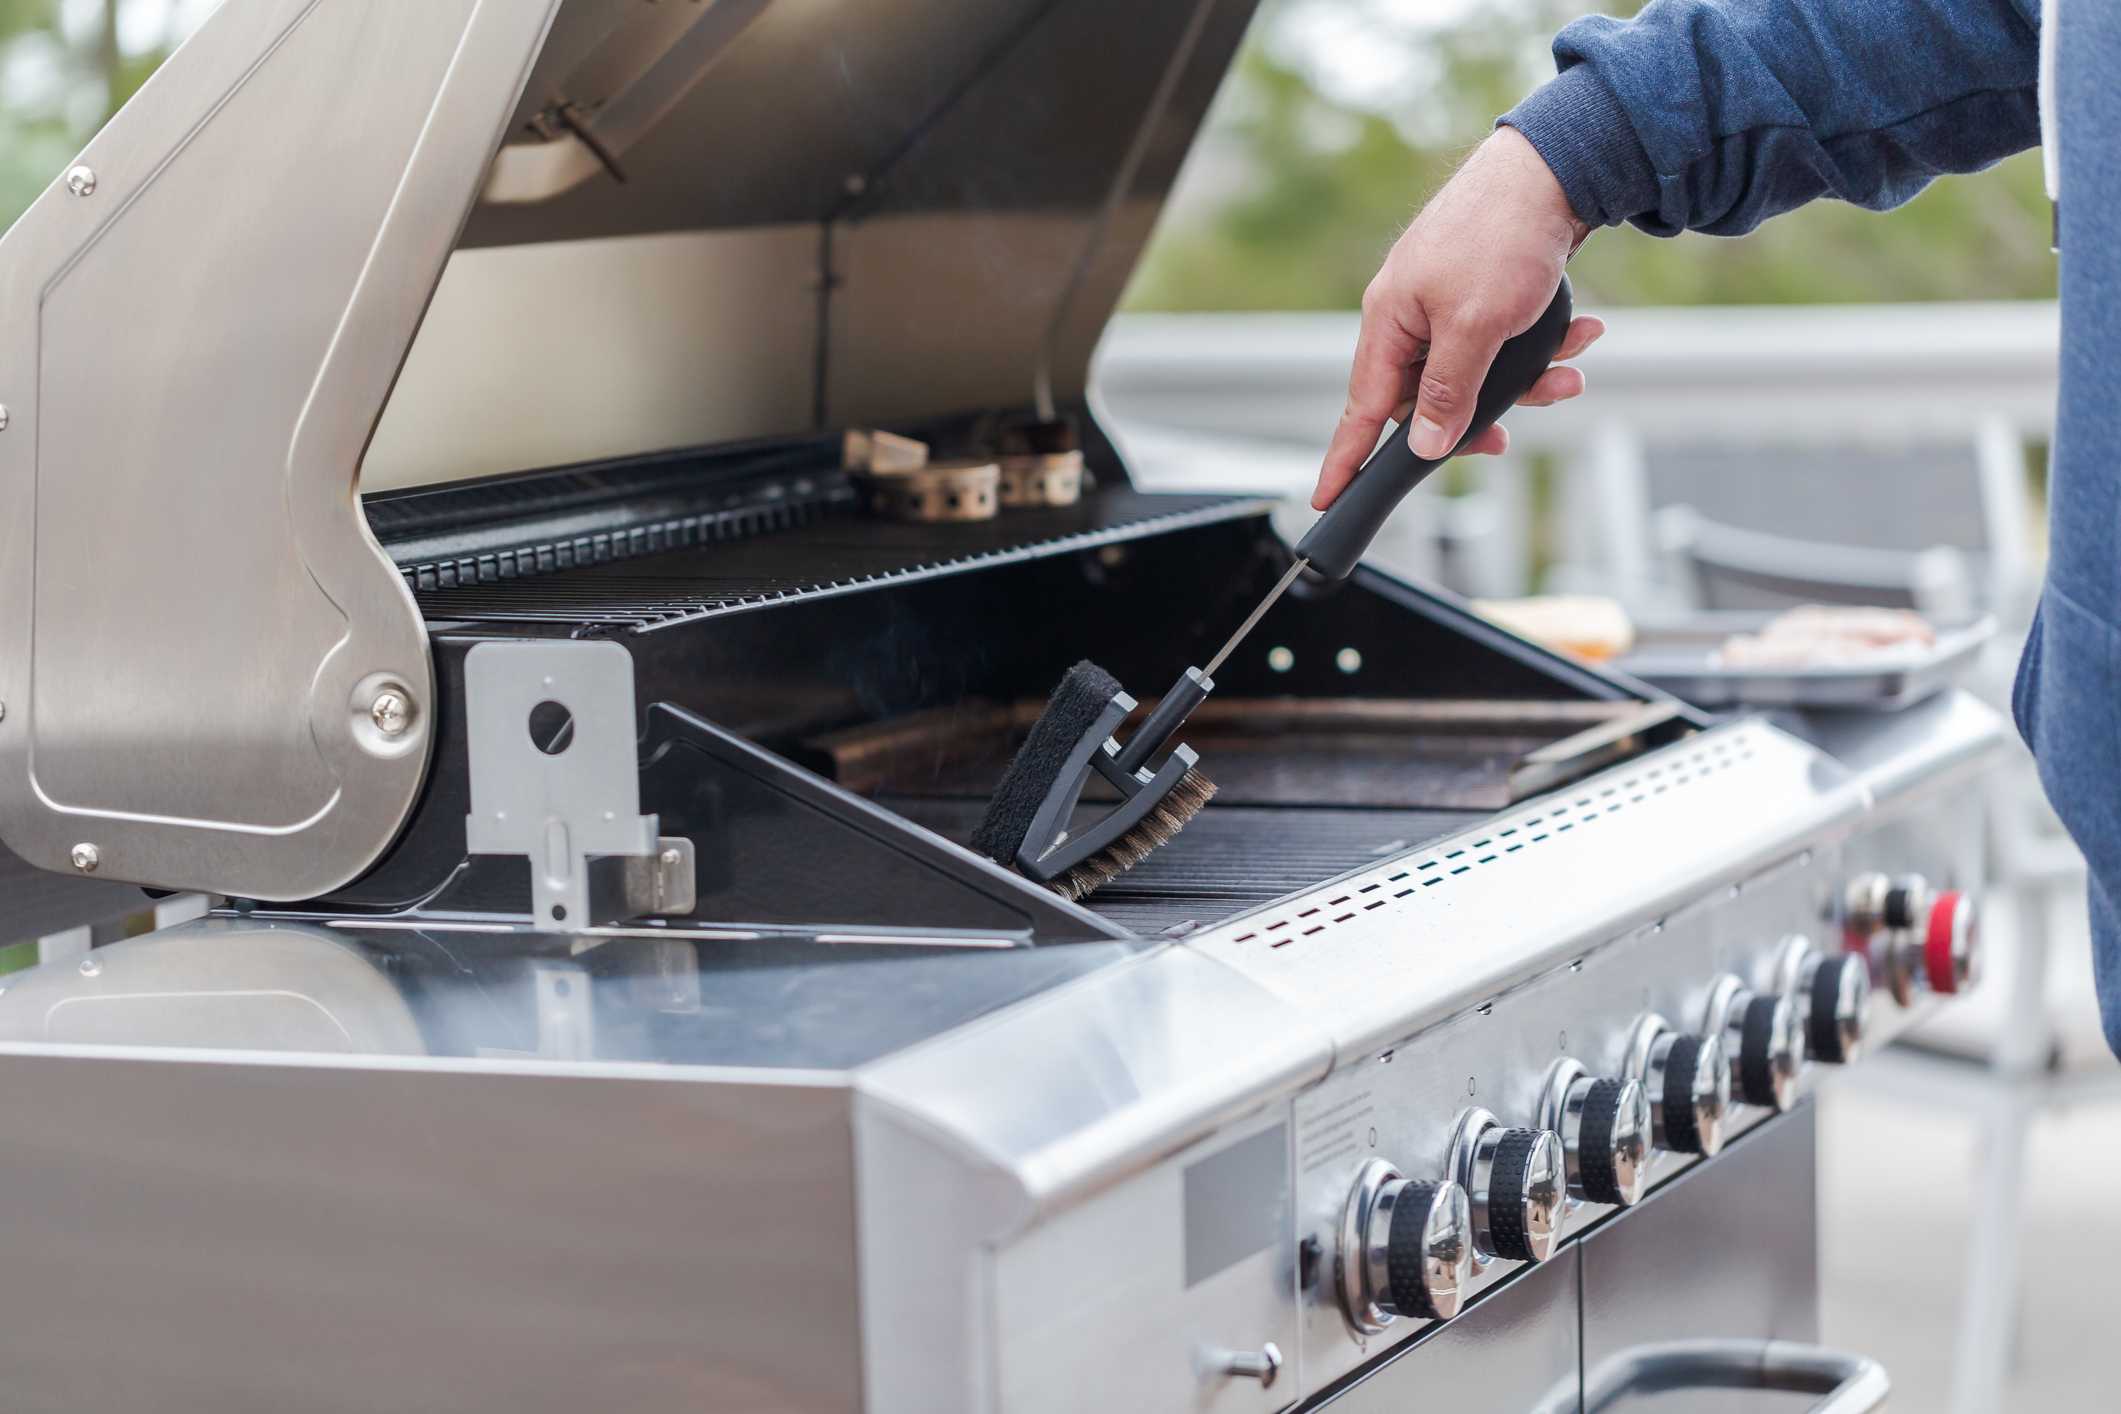 What is the best way to clean grill grates? Arm & Hammer’s Baking Soda + Vinegar Method